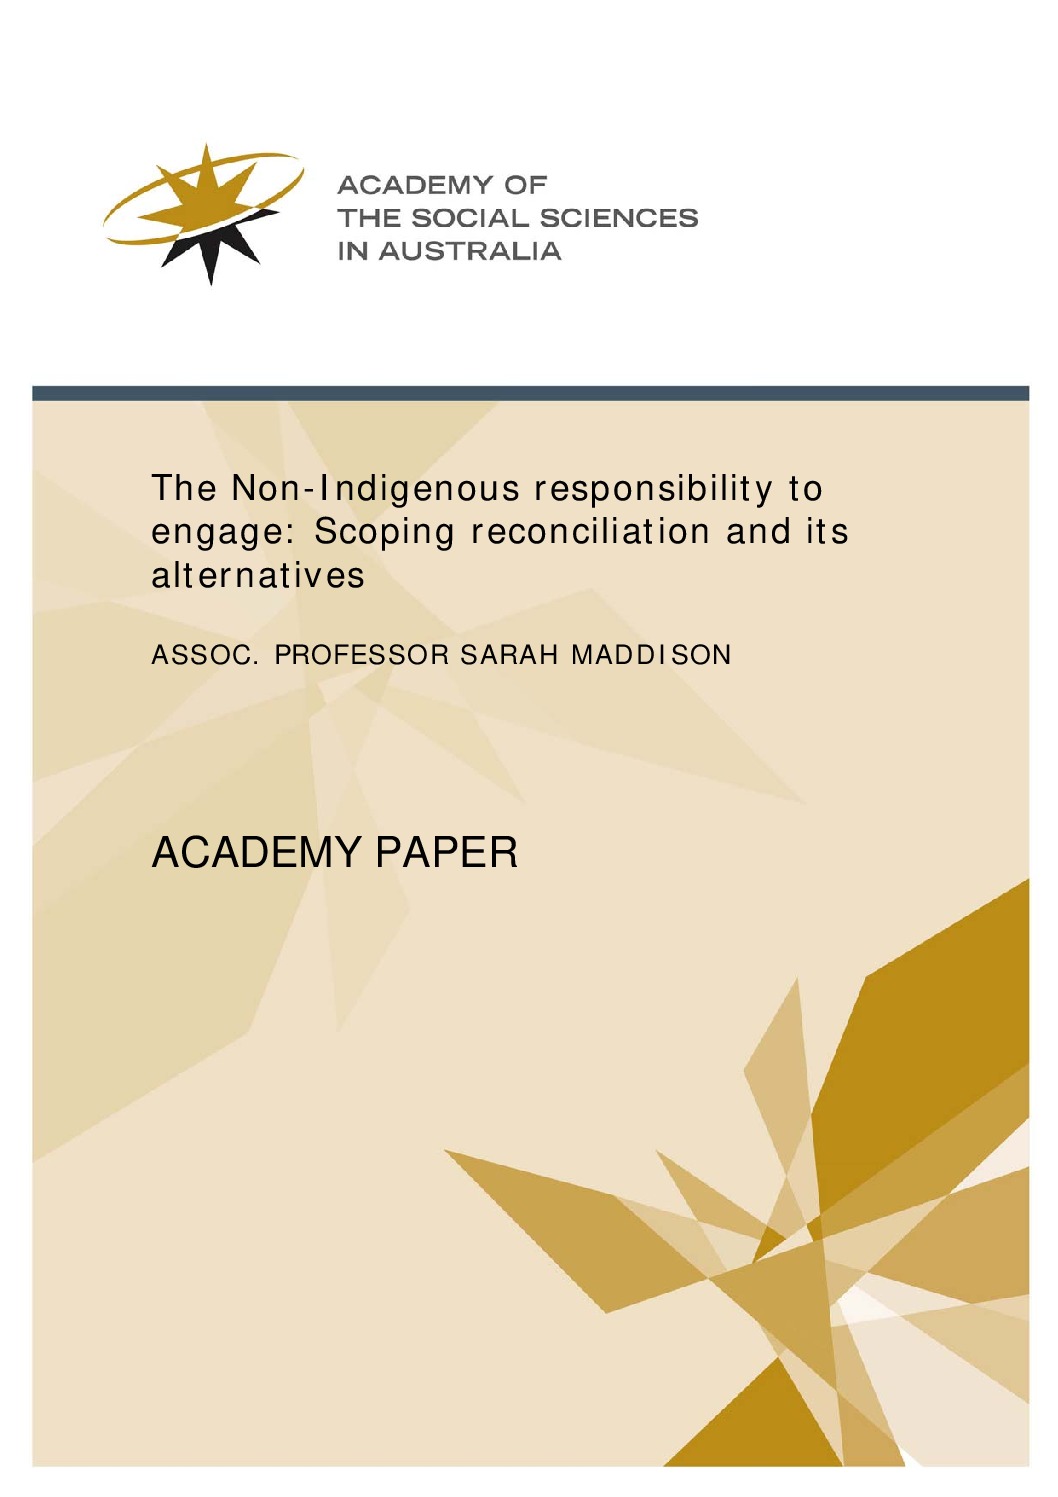 Academy Paper Final 7 2016 The Non Indigenous responsibility to engage Scoping reconciliation and its alternatives pdf 1